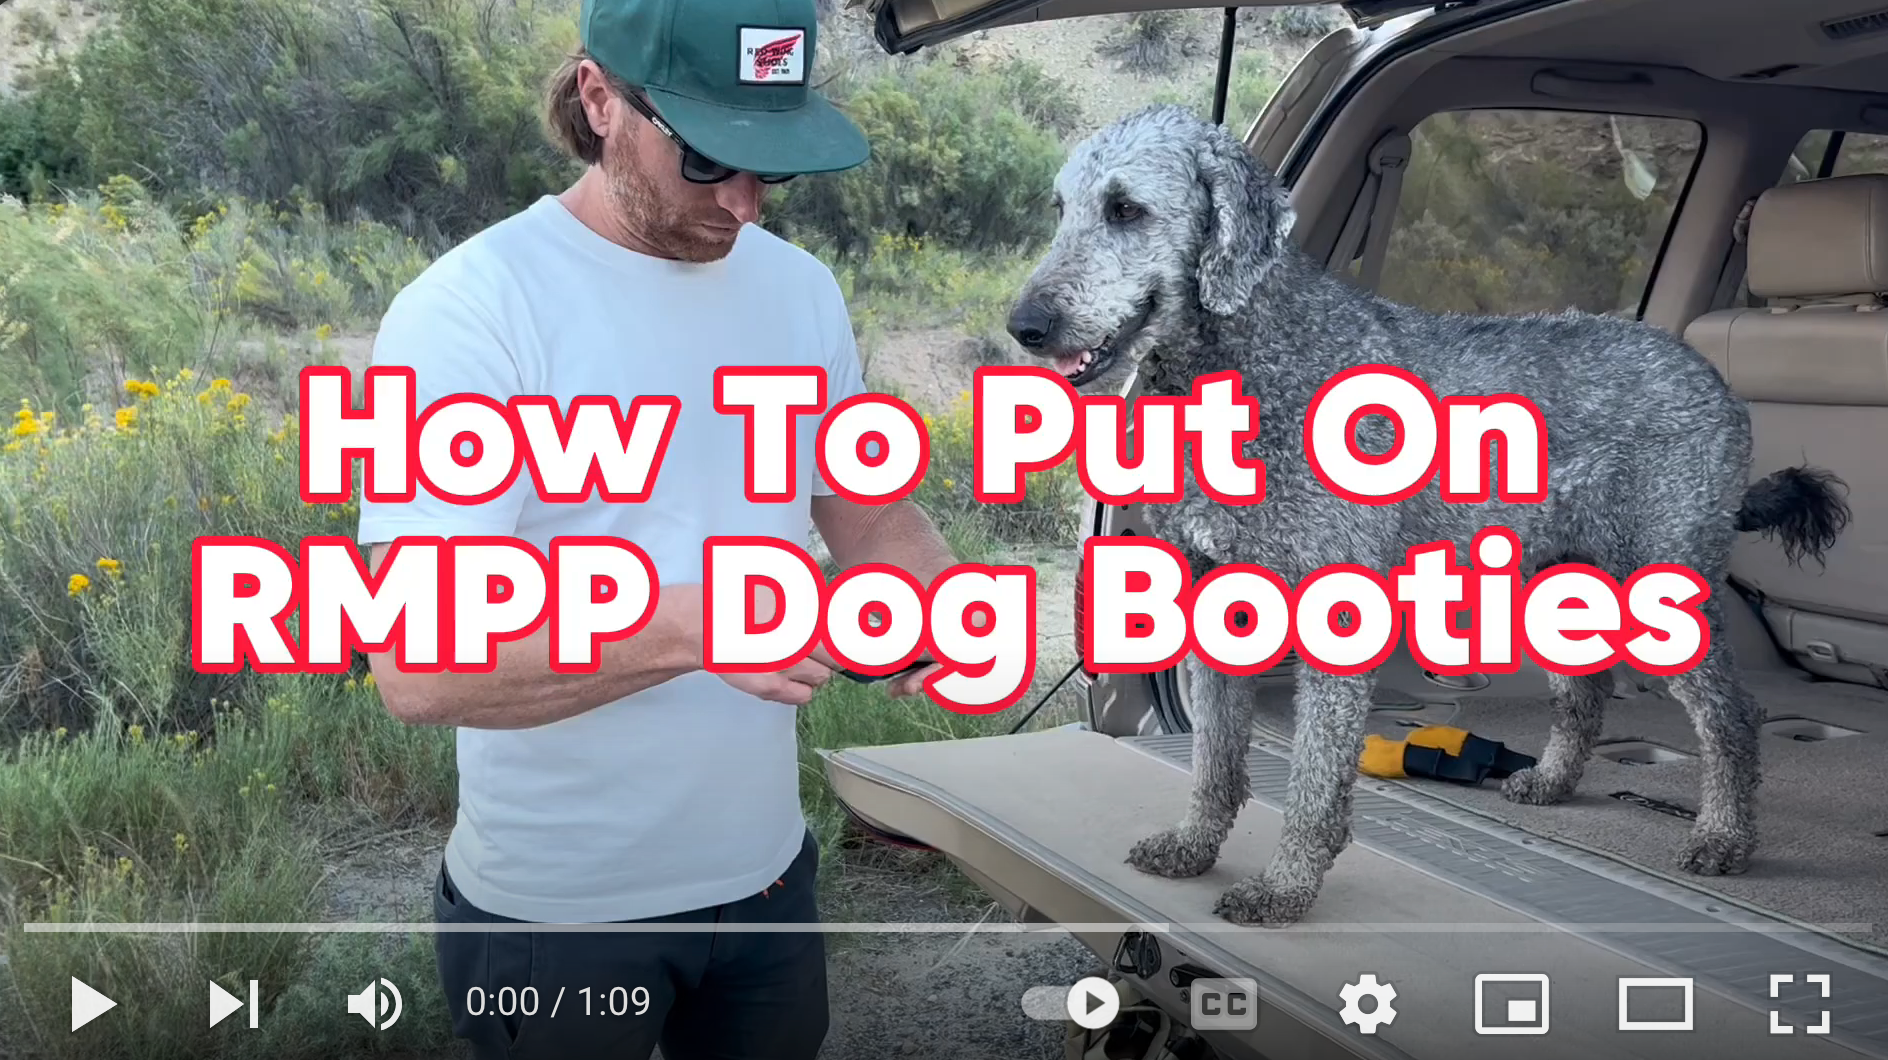 Load video: How To Put On RMPP Dog Booties Video Demo